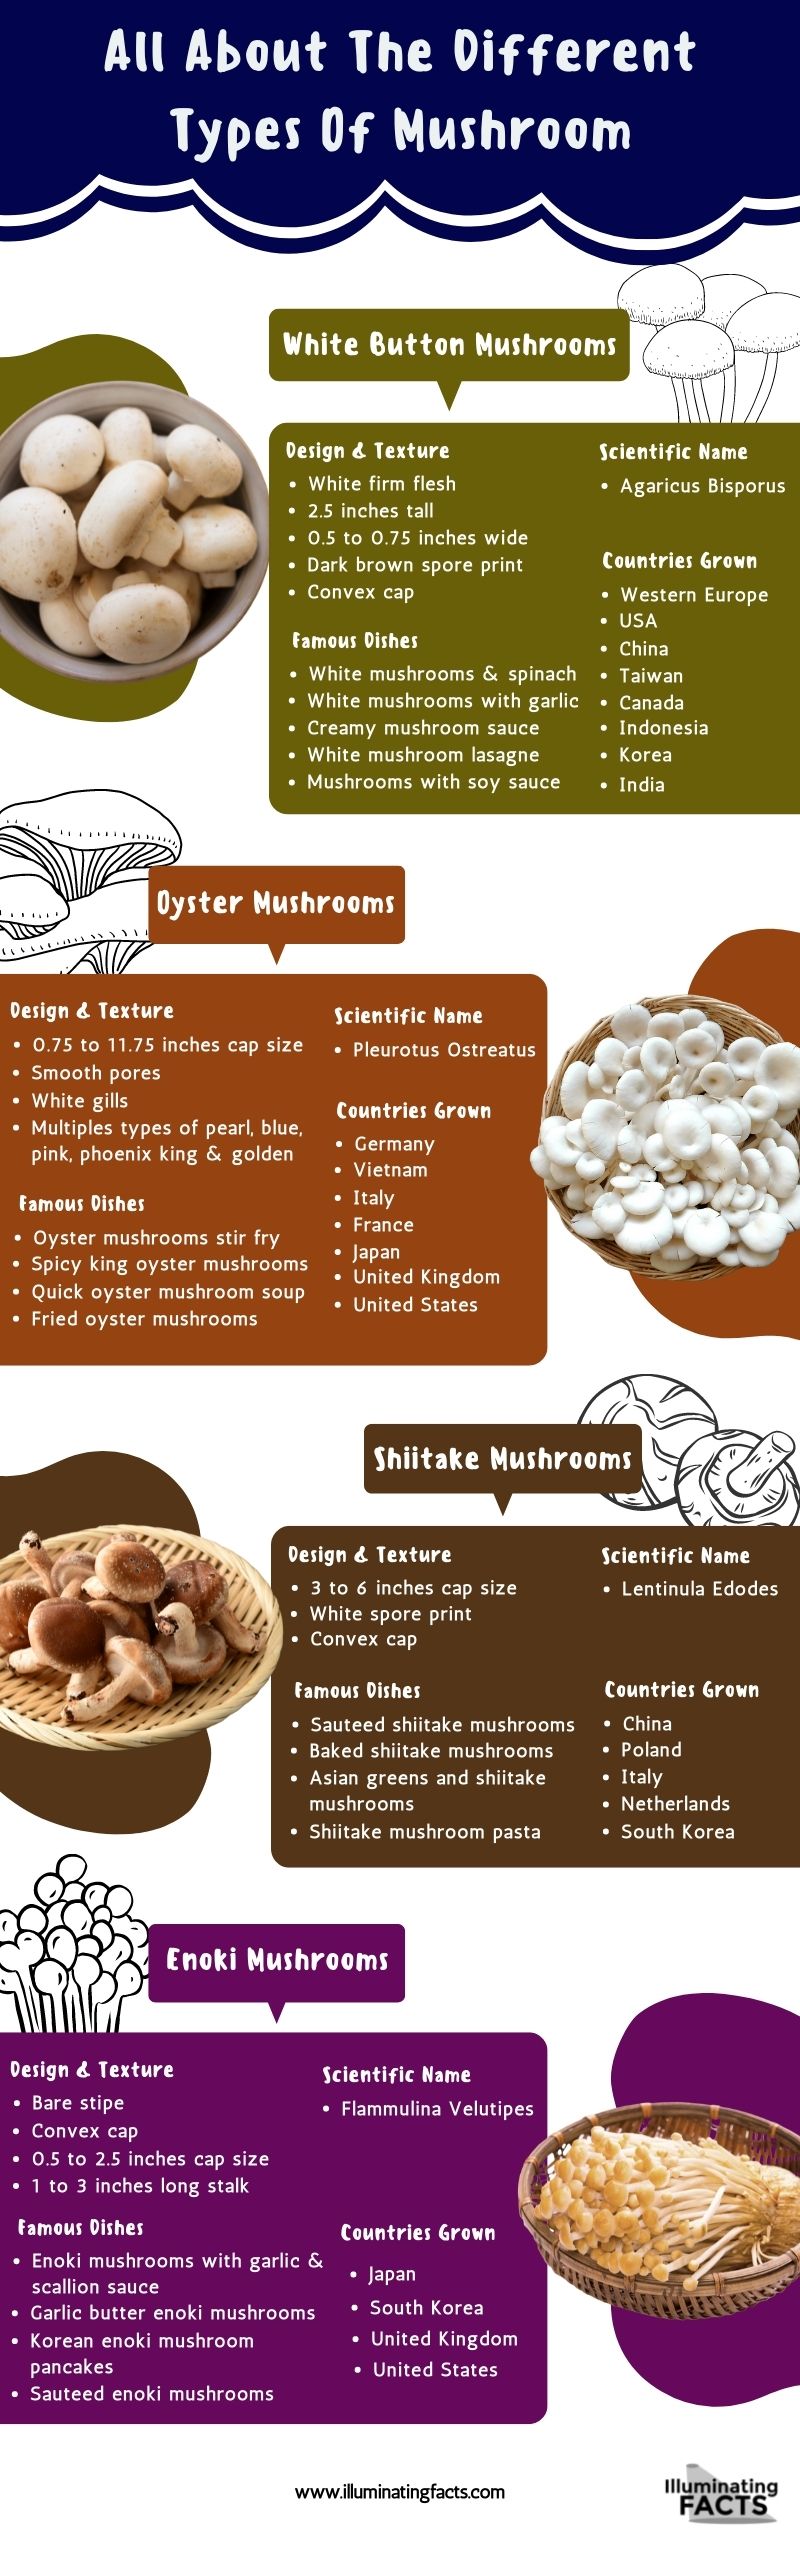 All About The Different Types Of Mushroom